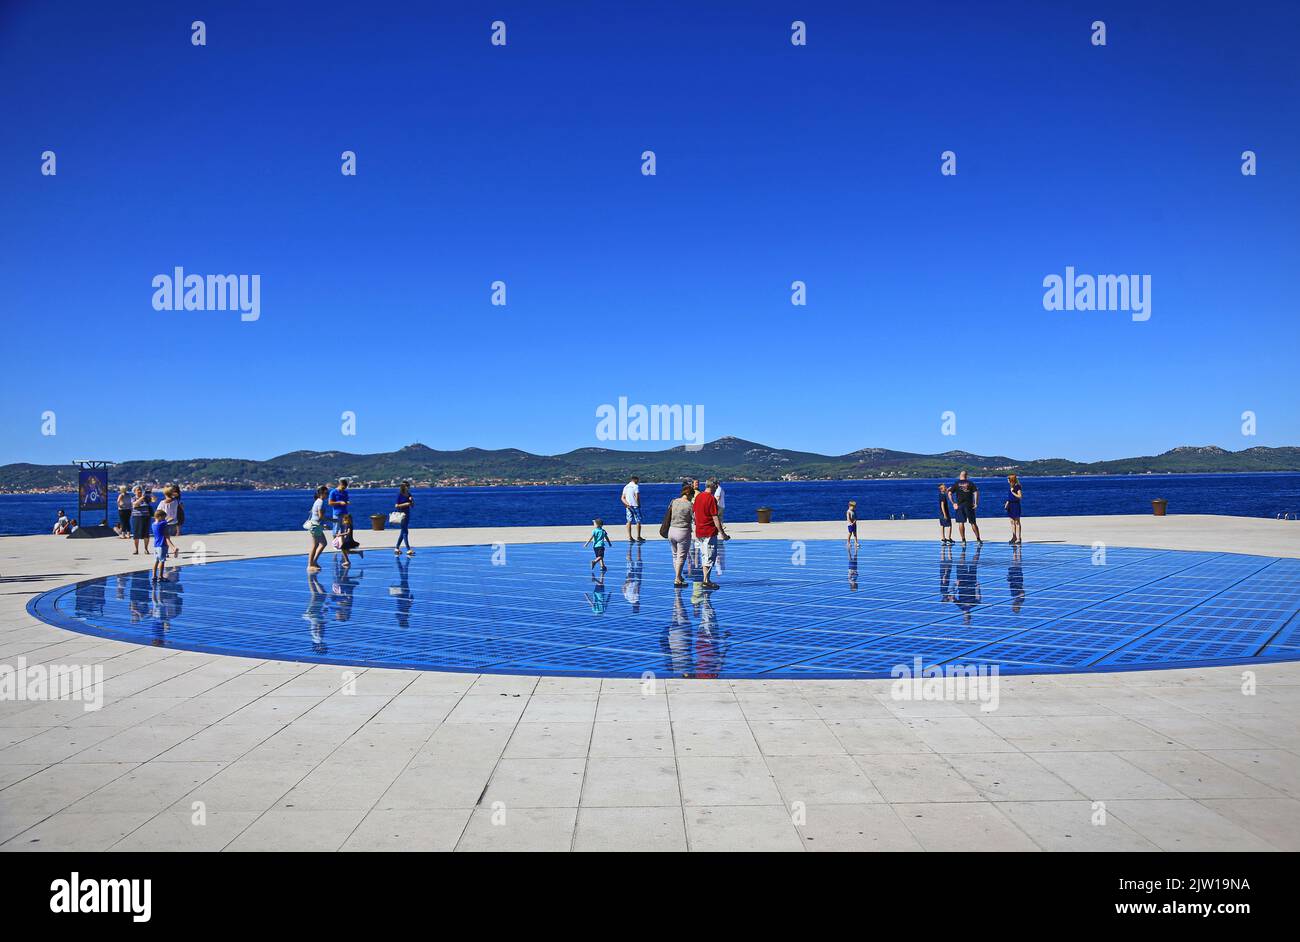 Solar panels as paving of the square in the city of Zadar  ZADAR, CROATIA - AUGUST 2019 Stock Photo